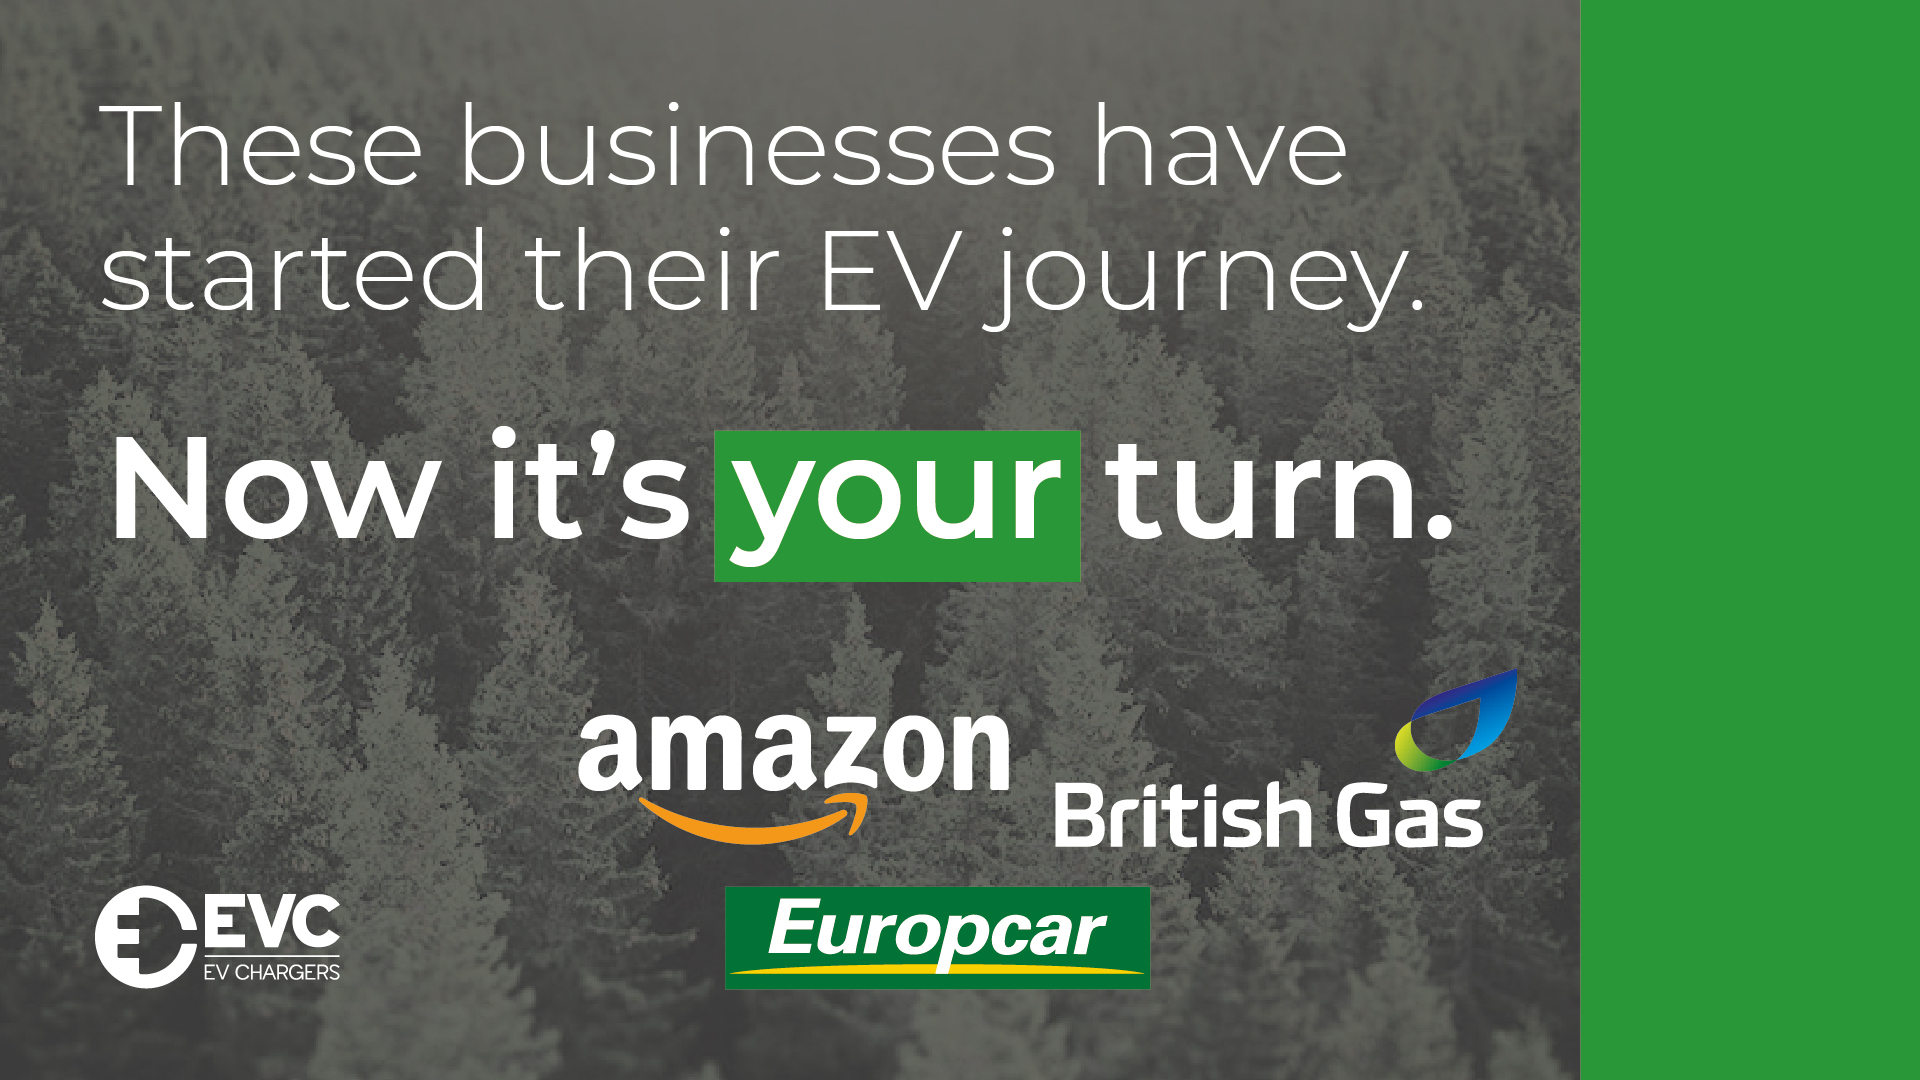 These businesses have started their EV journey. Now it’s your turn.